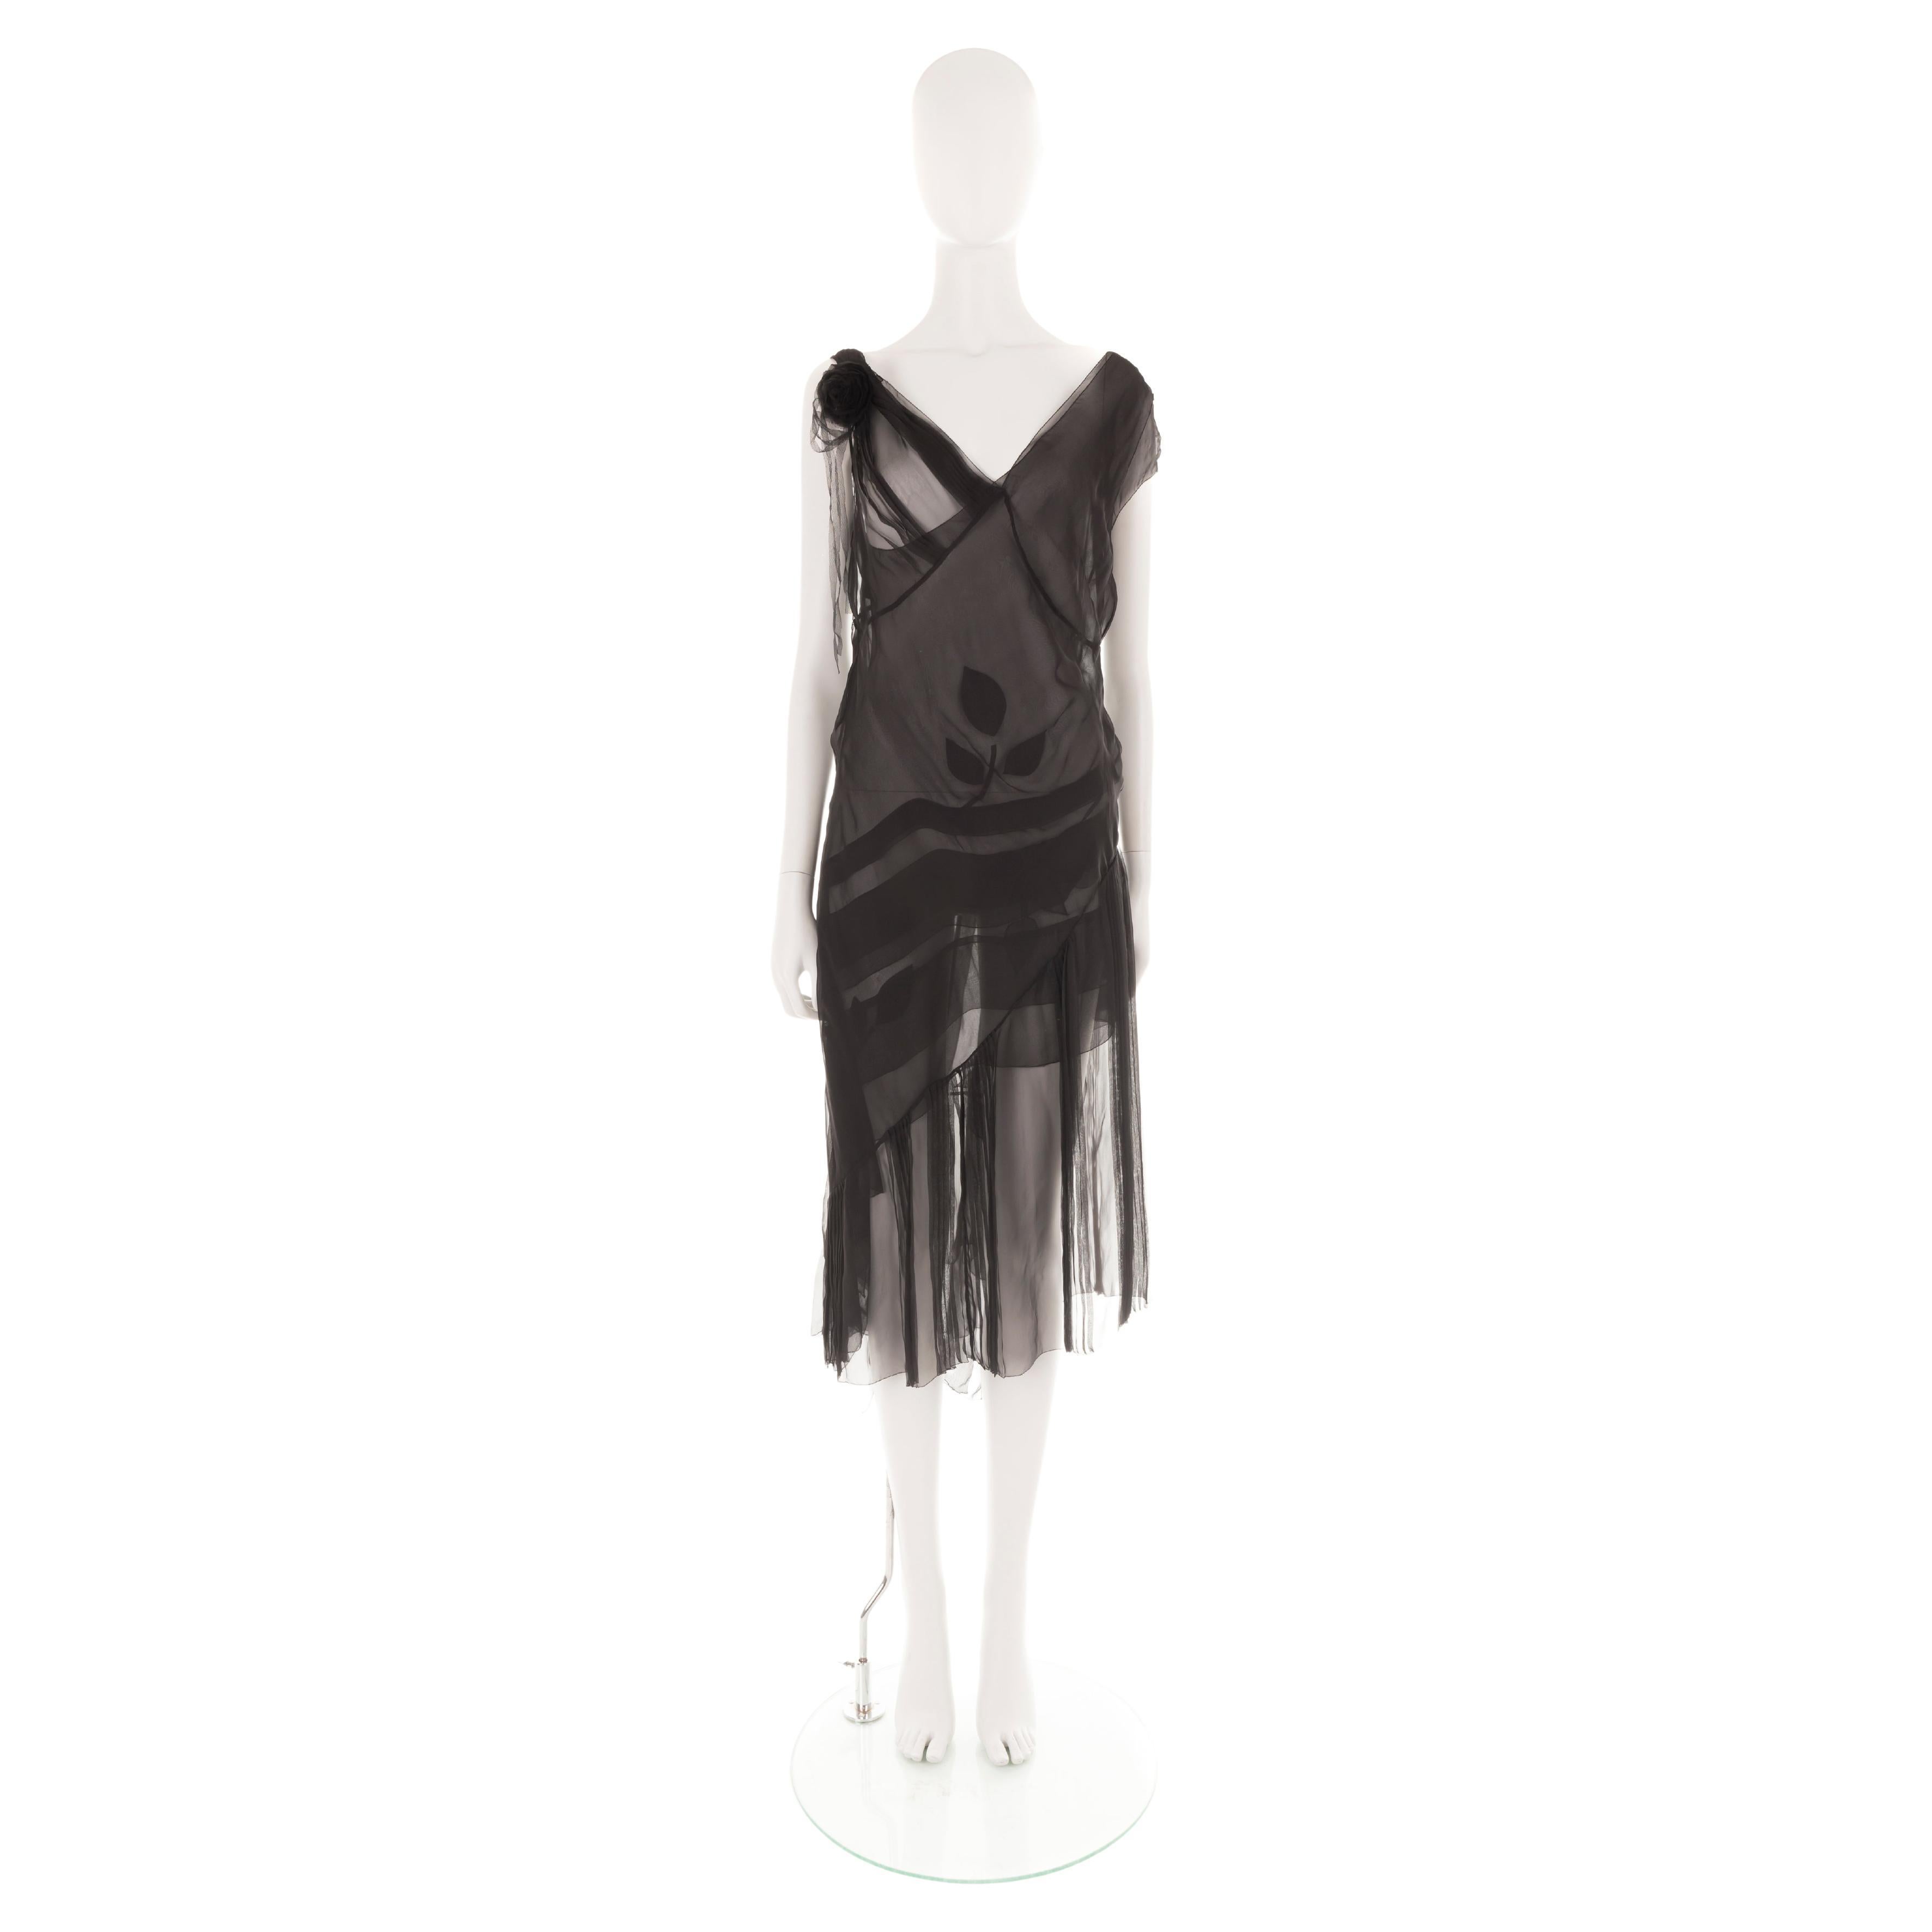 - 2 pieces dress (+ additional black under slip dress, not pictured)
- Sheer black silk chiffon layers
- One shoulder asymmetric underlayer with floral motif
- V-neck overlay with asymmetric pleated overskirt
- Black tulle rose appliqué